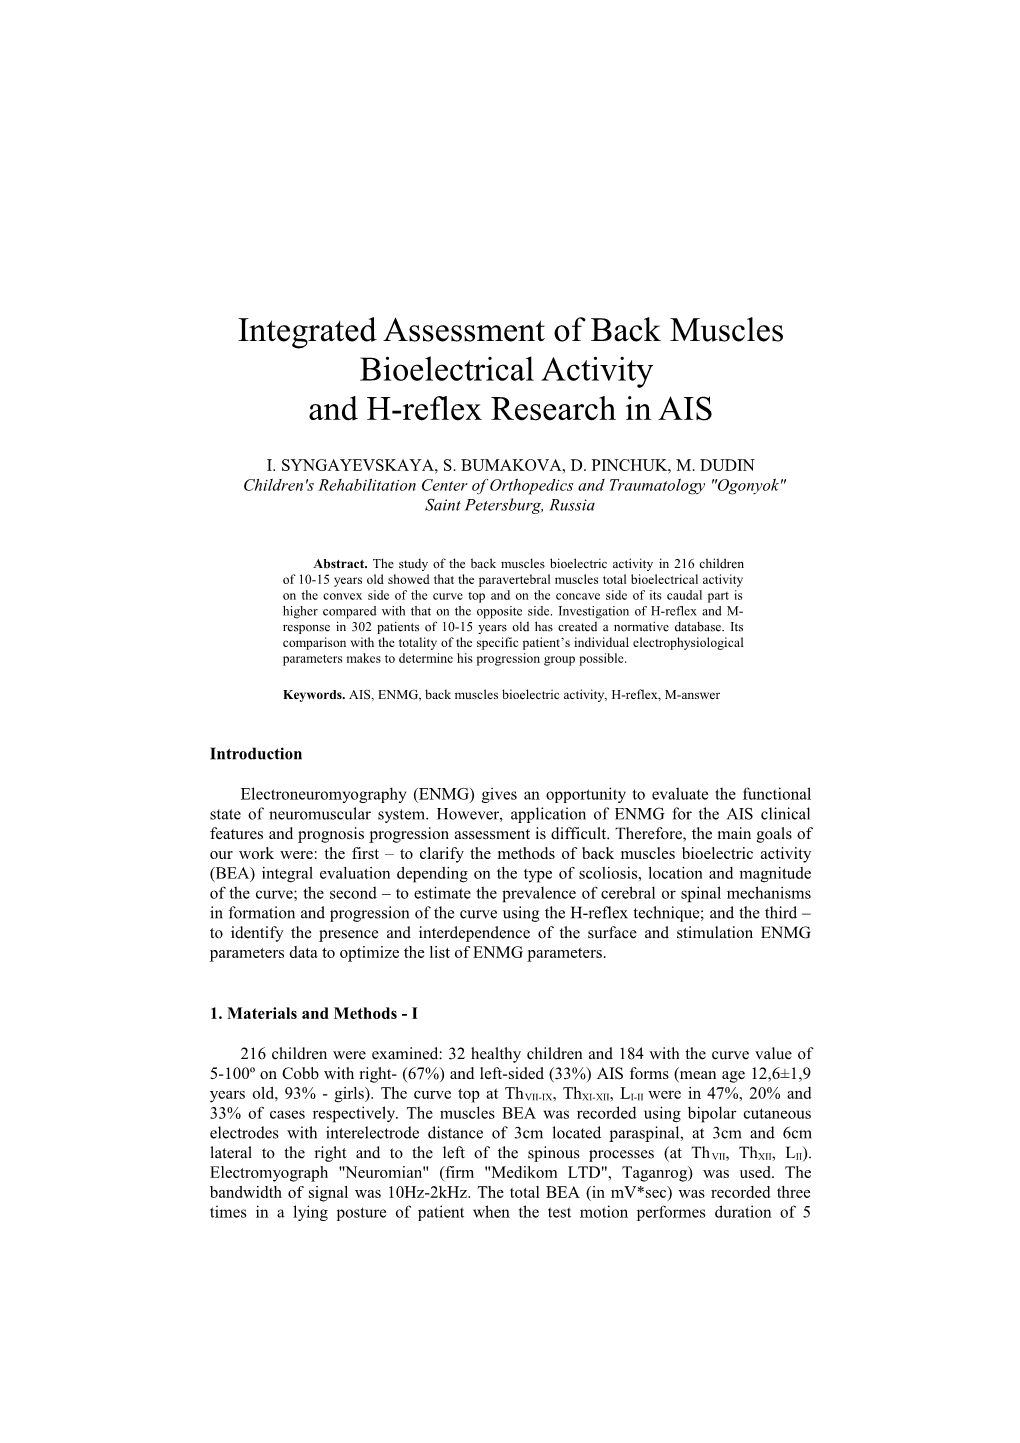 Integrated Assessment of Back Muscles Bioelectrical Activity